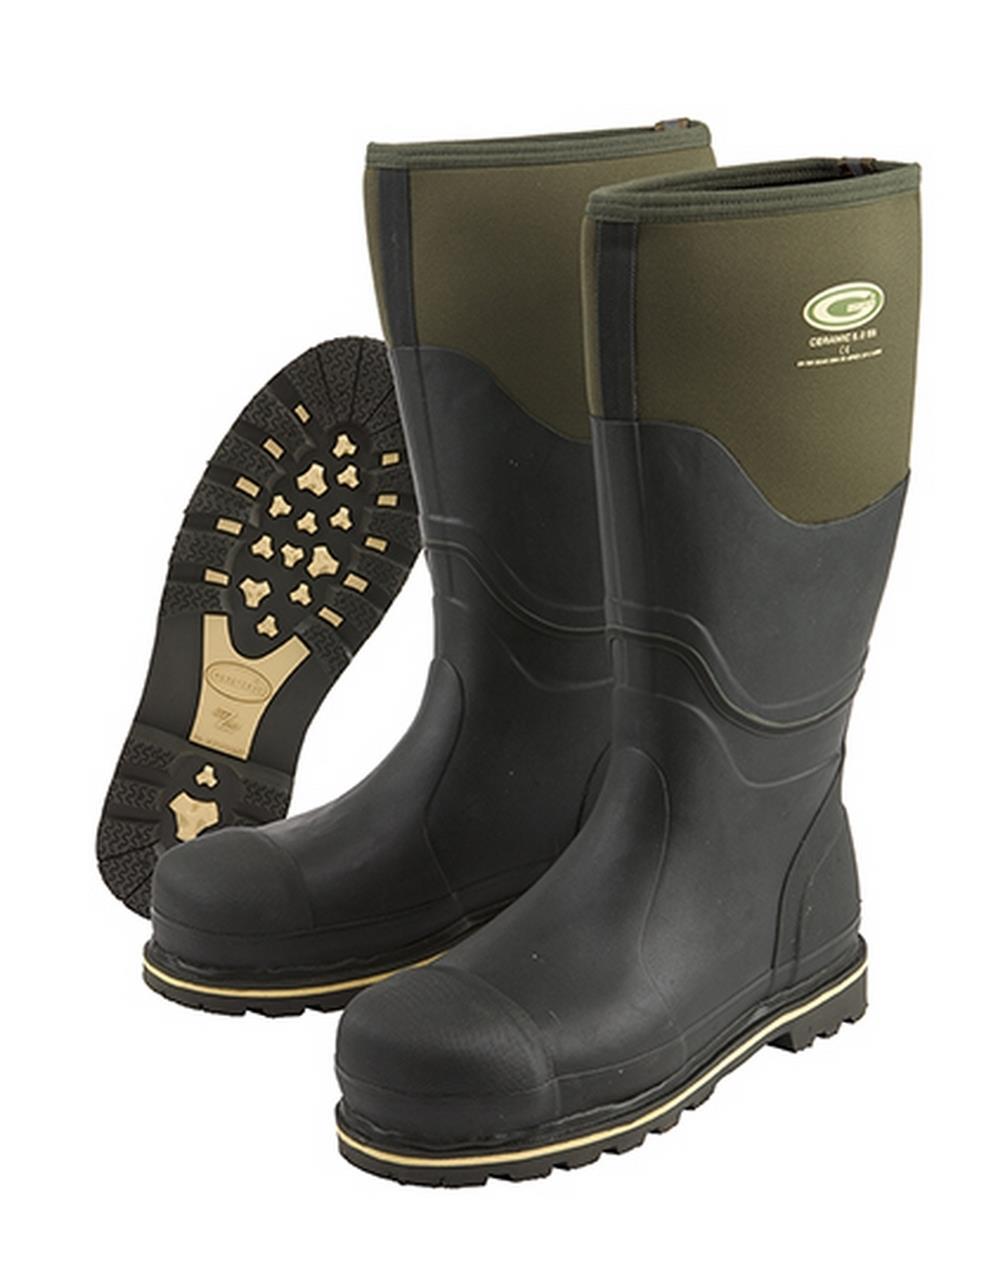 AMBLERS AS1009 GREEN/BLACK SAFETY WELLIES SIZE 11 